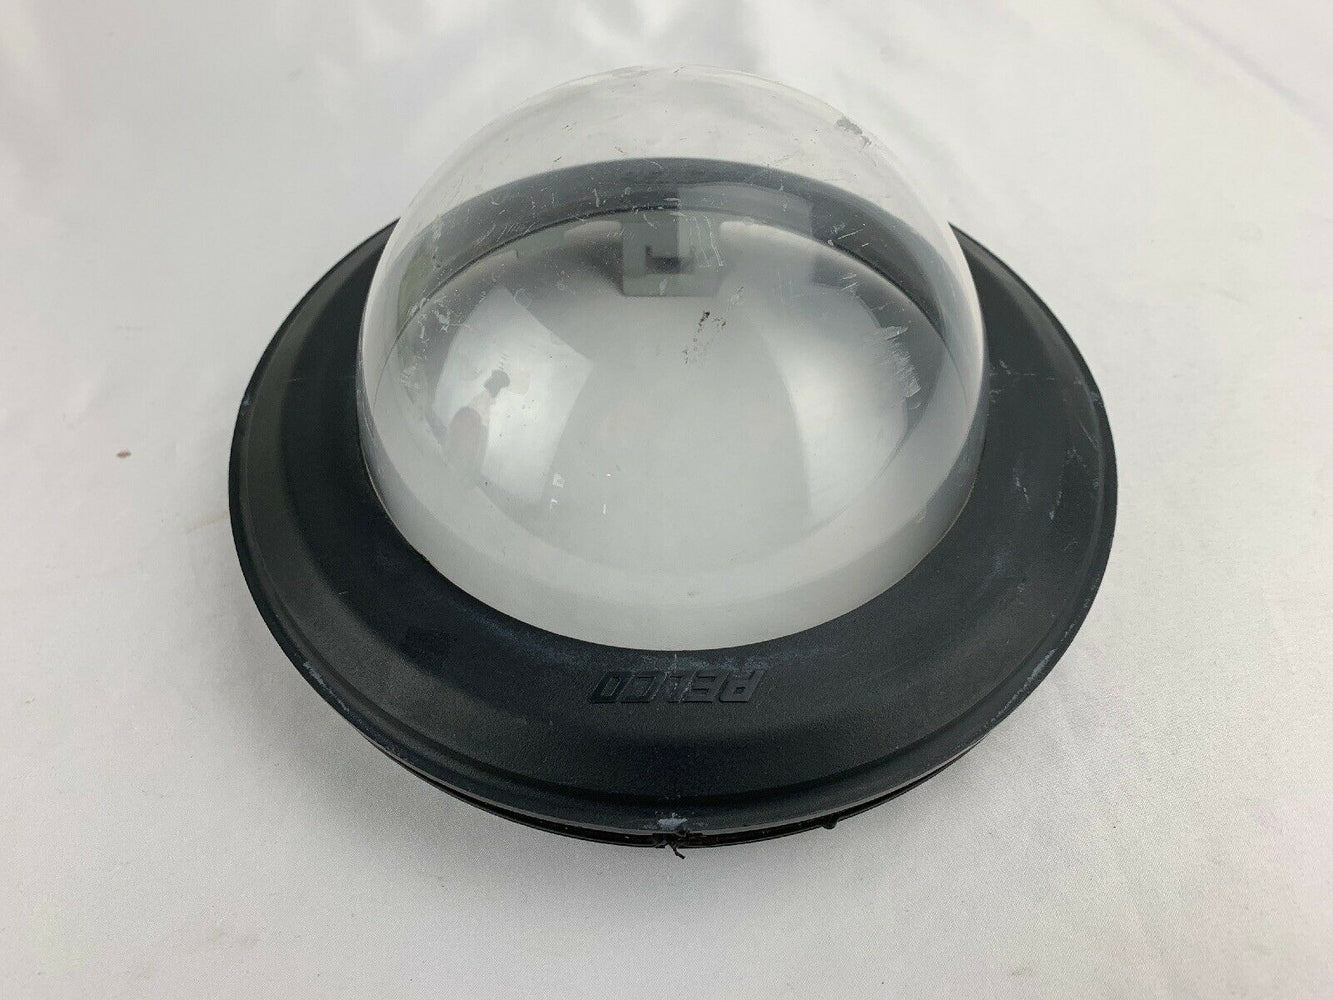 Pelco LDHQPB-1 Clear Bubble Dome For Pelco Spectra PTZ Security Cameras